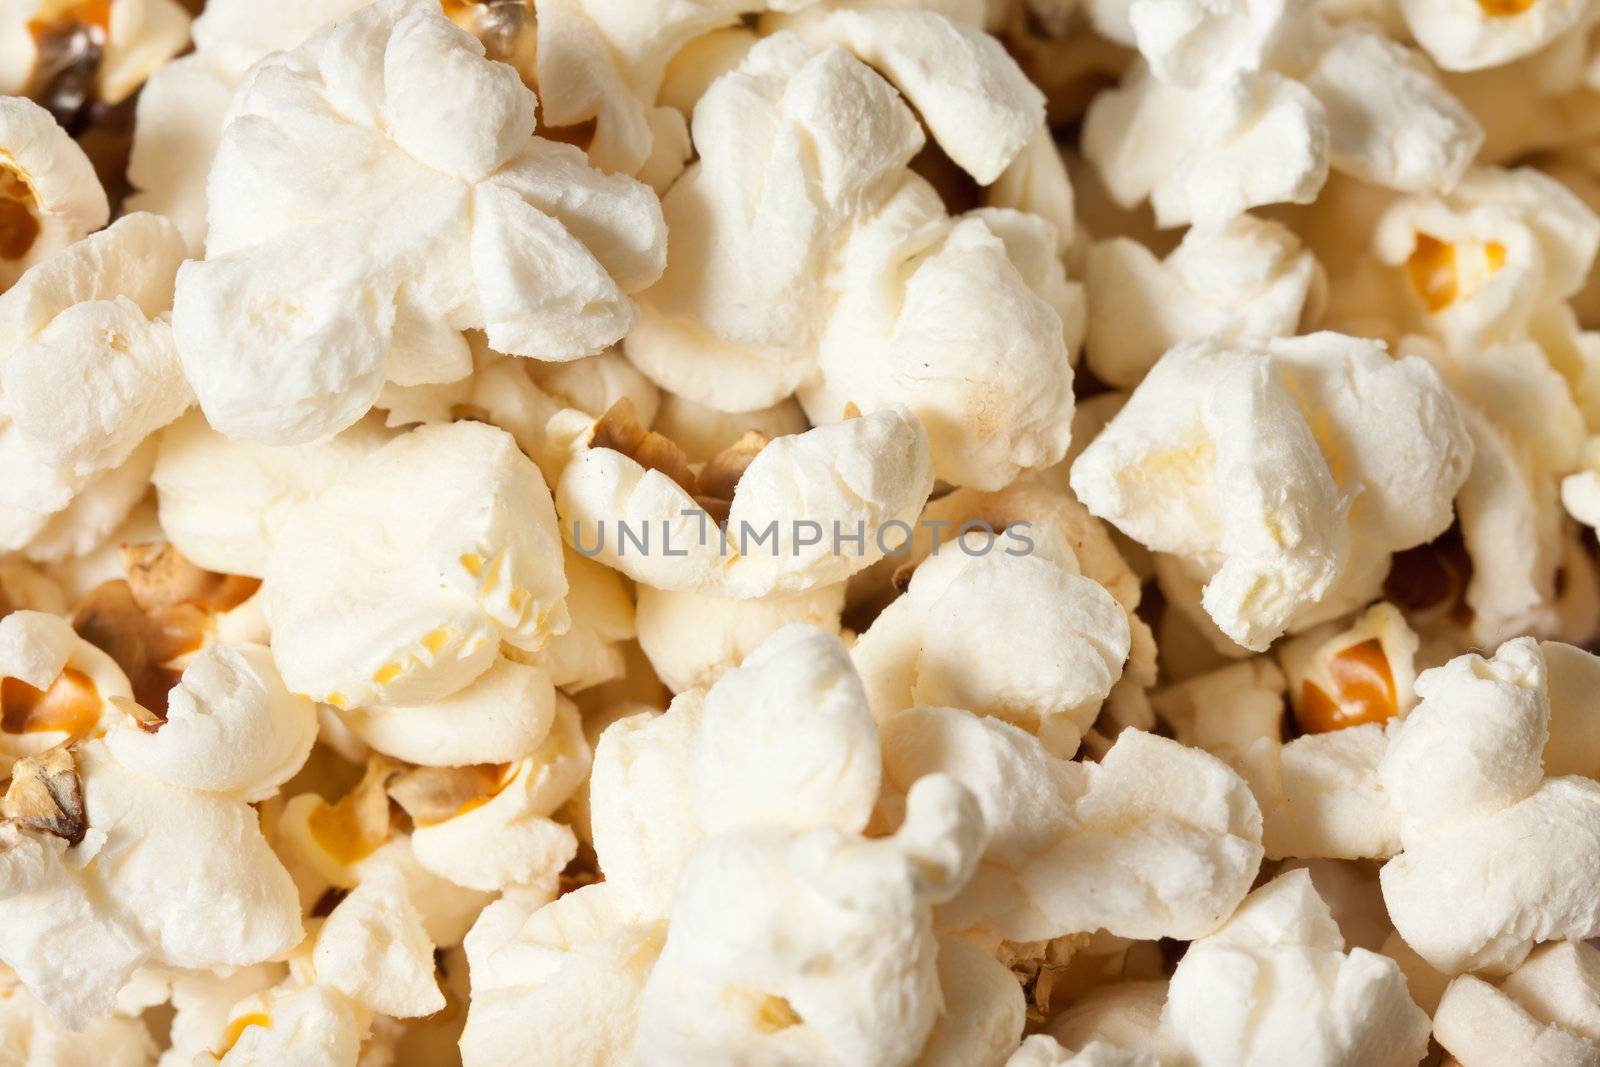 Close-up shot of delicious freshly popped popcorn